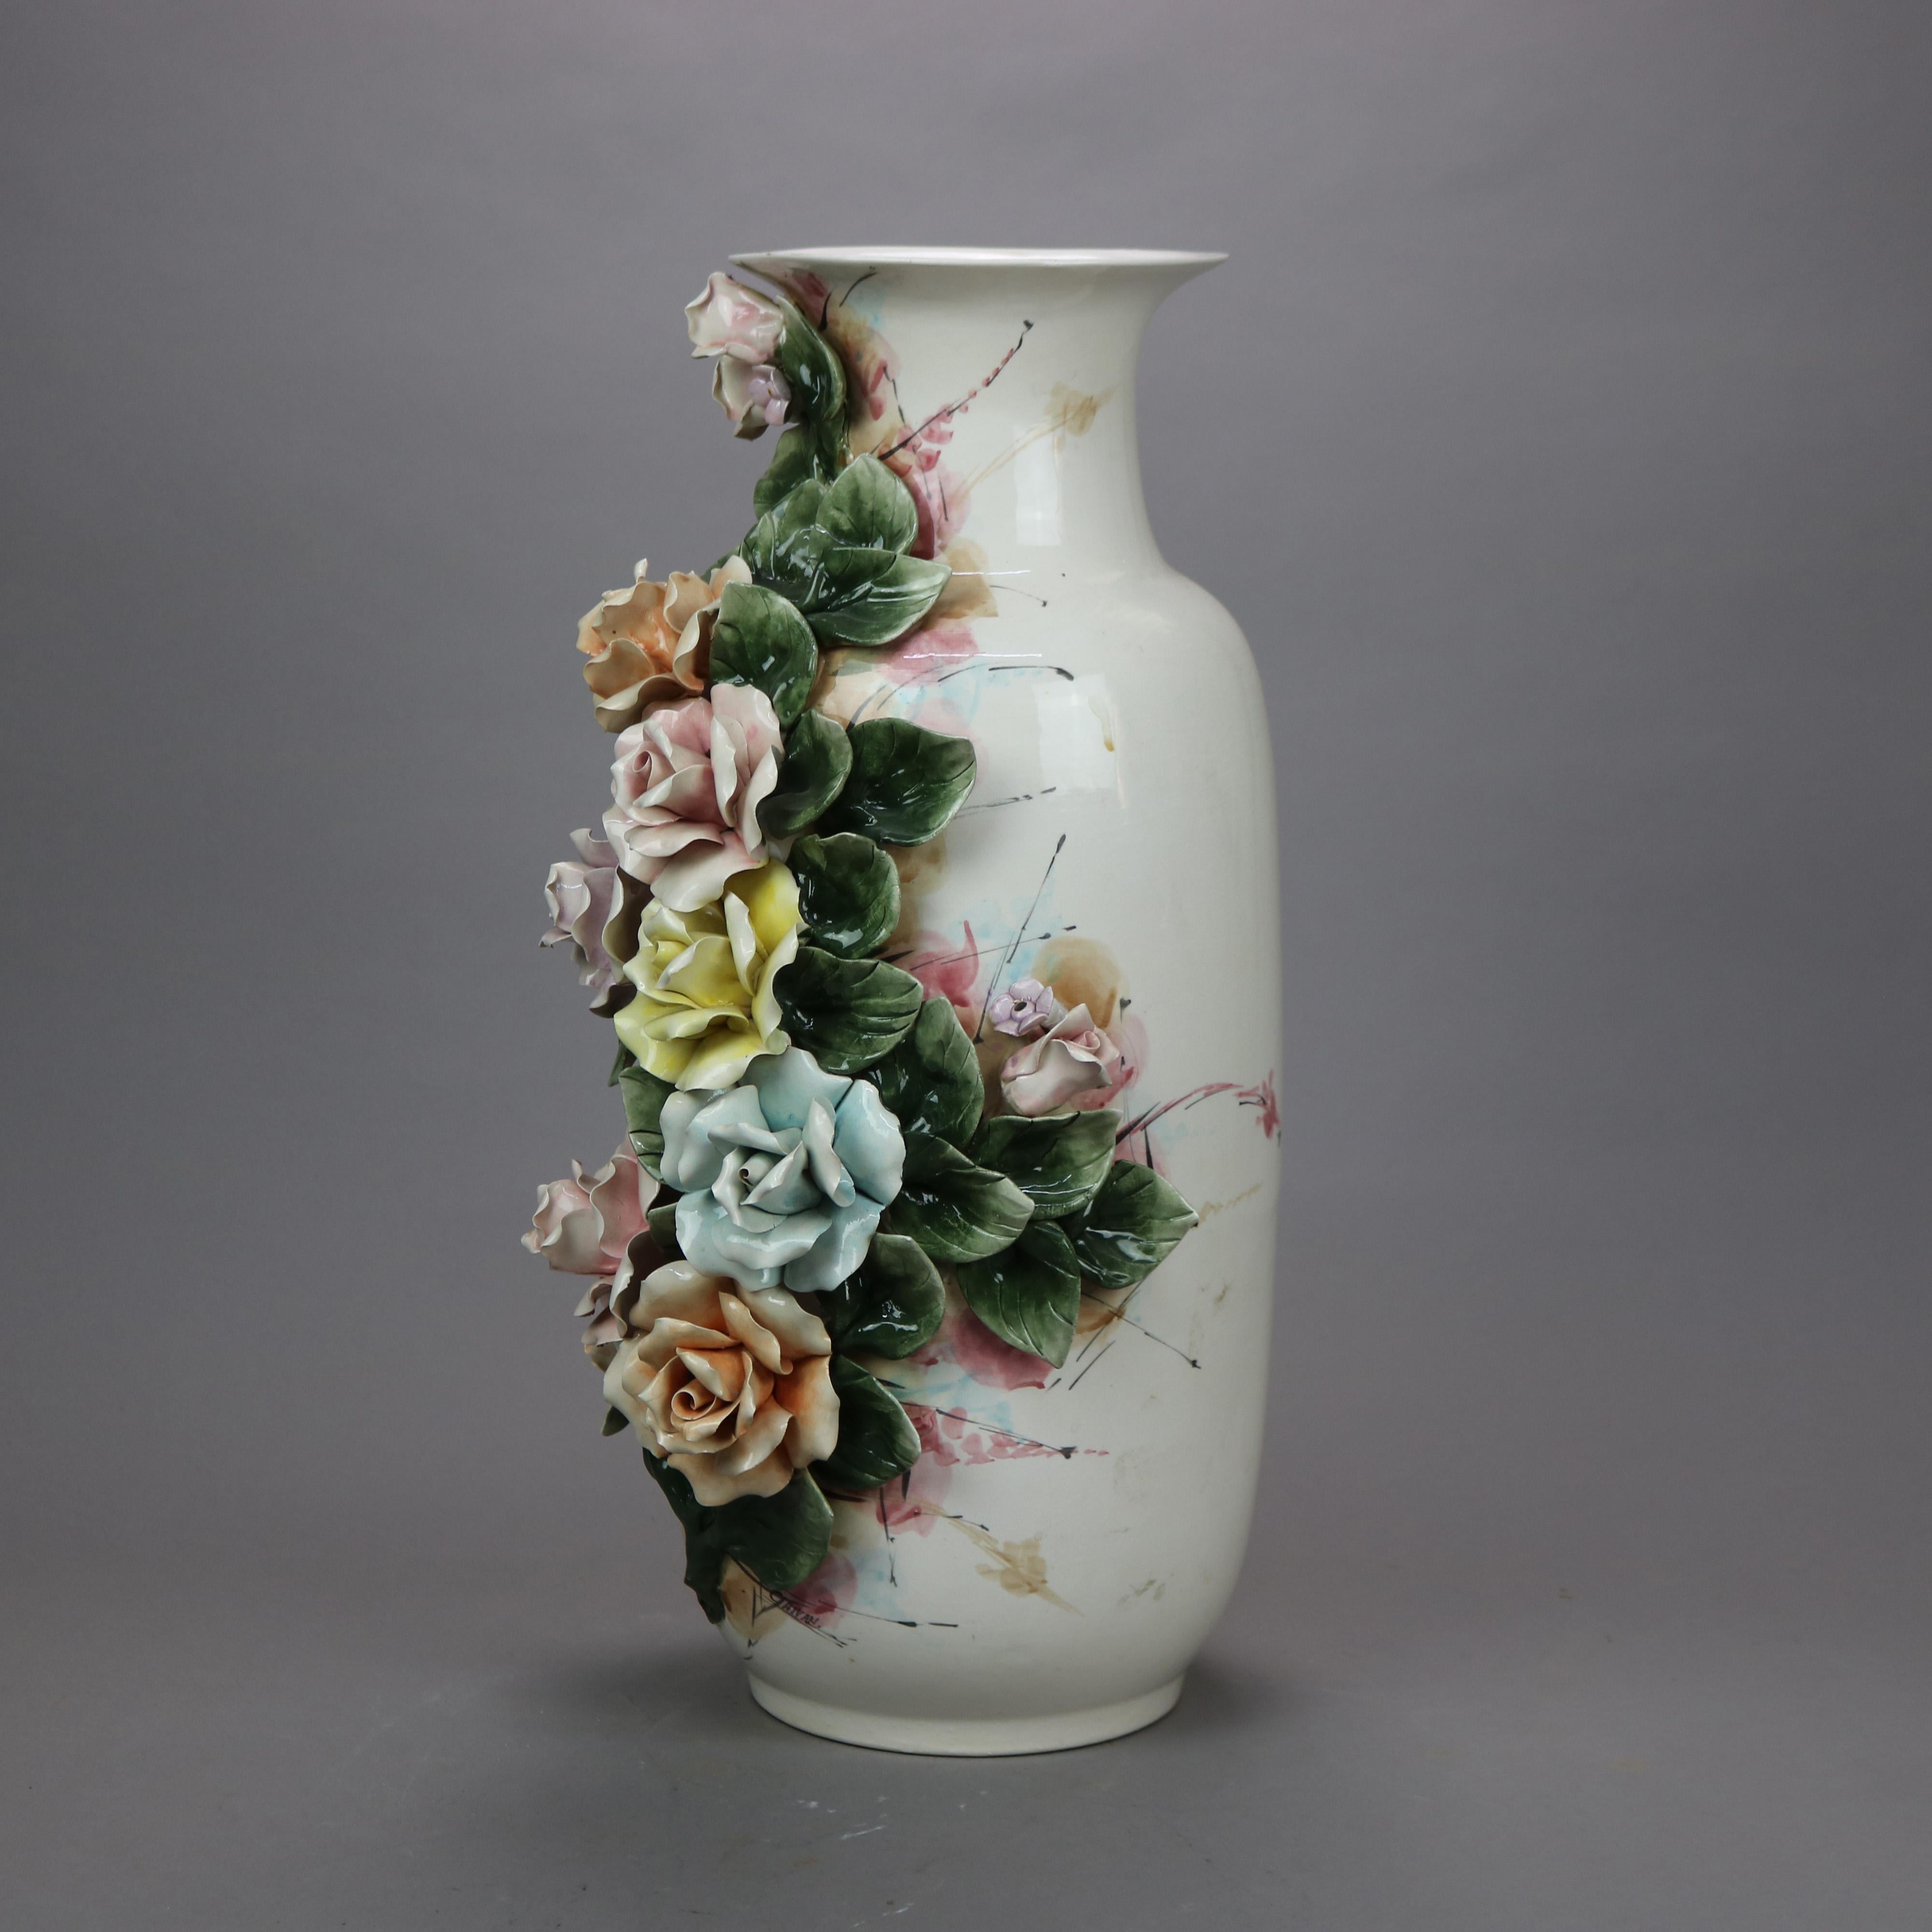 An antique Italian Capodimonte floor vase offers pottery construction with applied roses, signed as photographed, c1900.

Measures- 22.25''H x 10''W x 11''D.

Catalogue Note: Ask about DISCOUNTED DELIVERY RATES available to most regions within 1,500